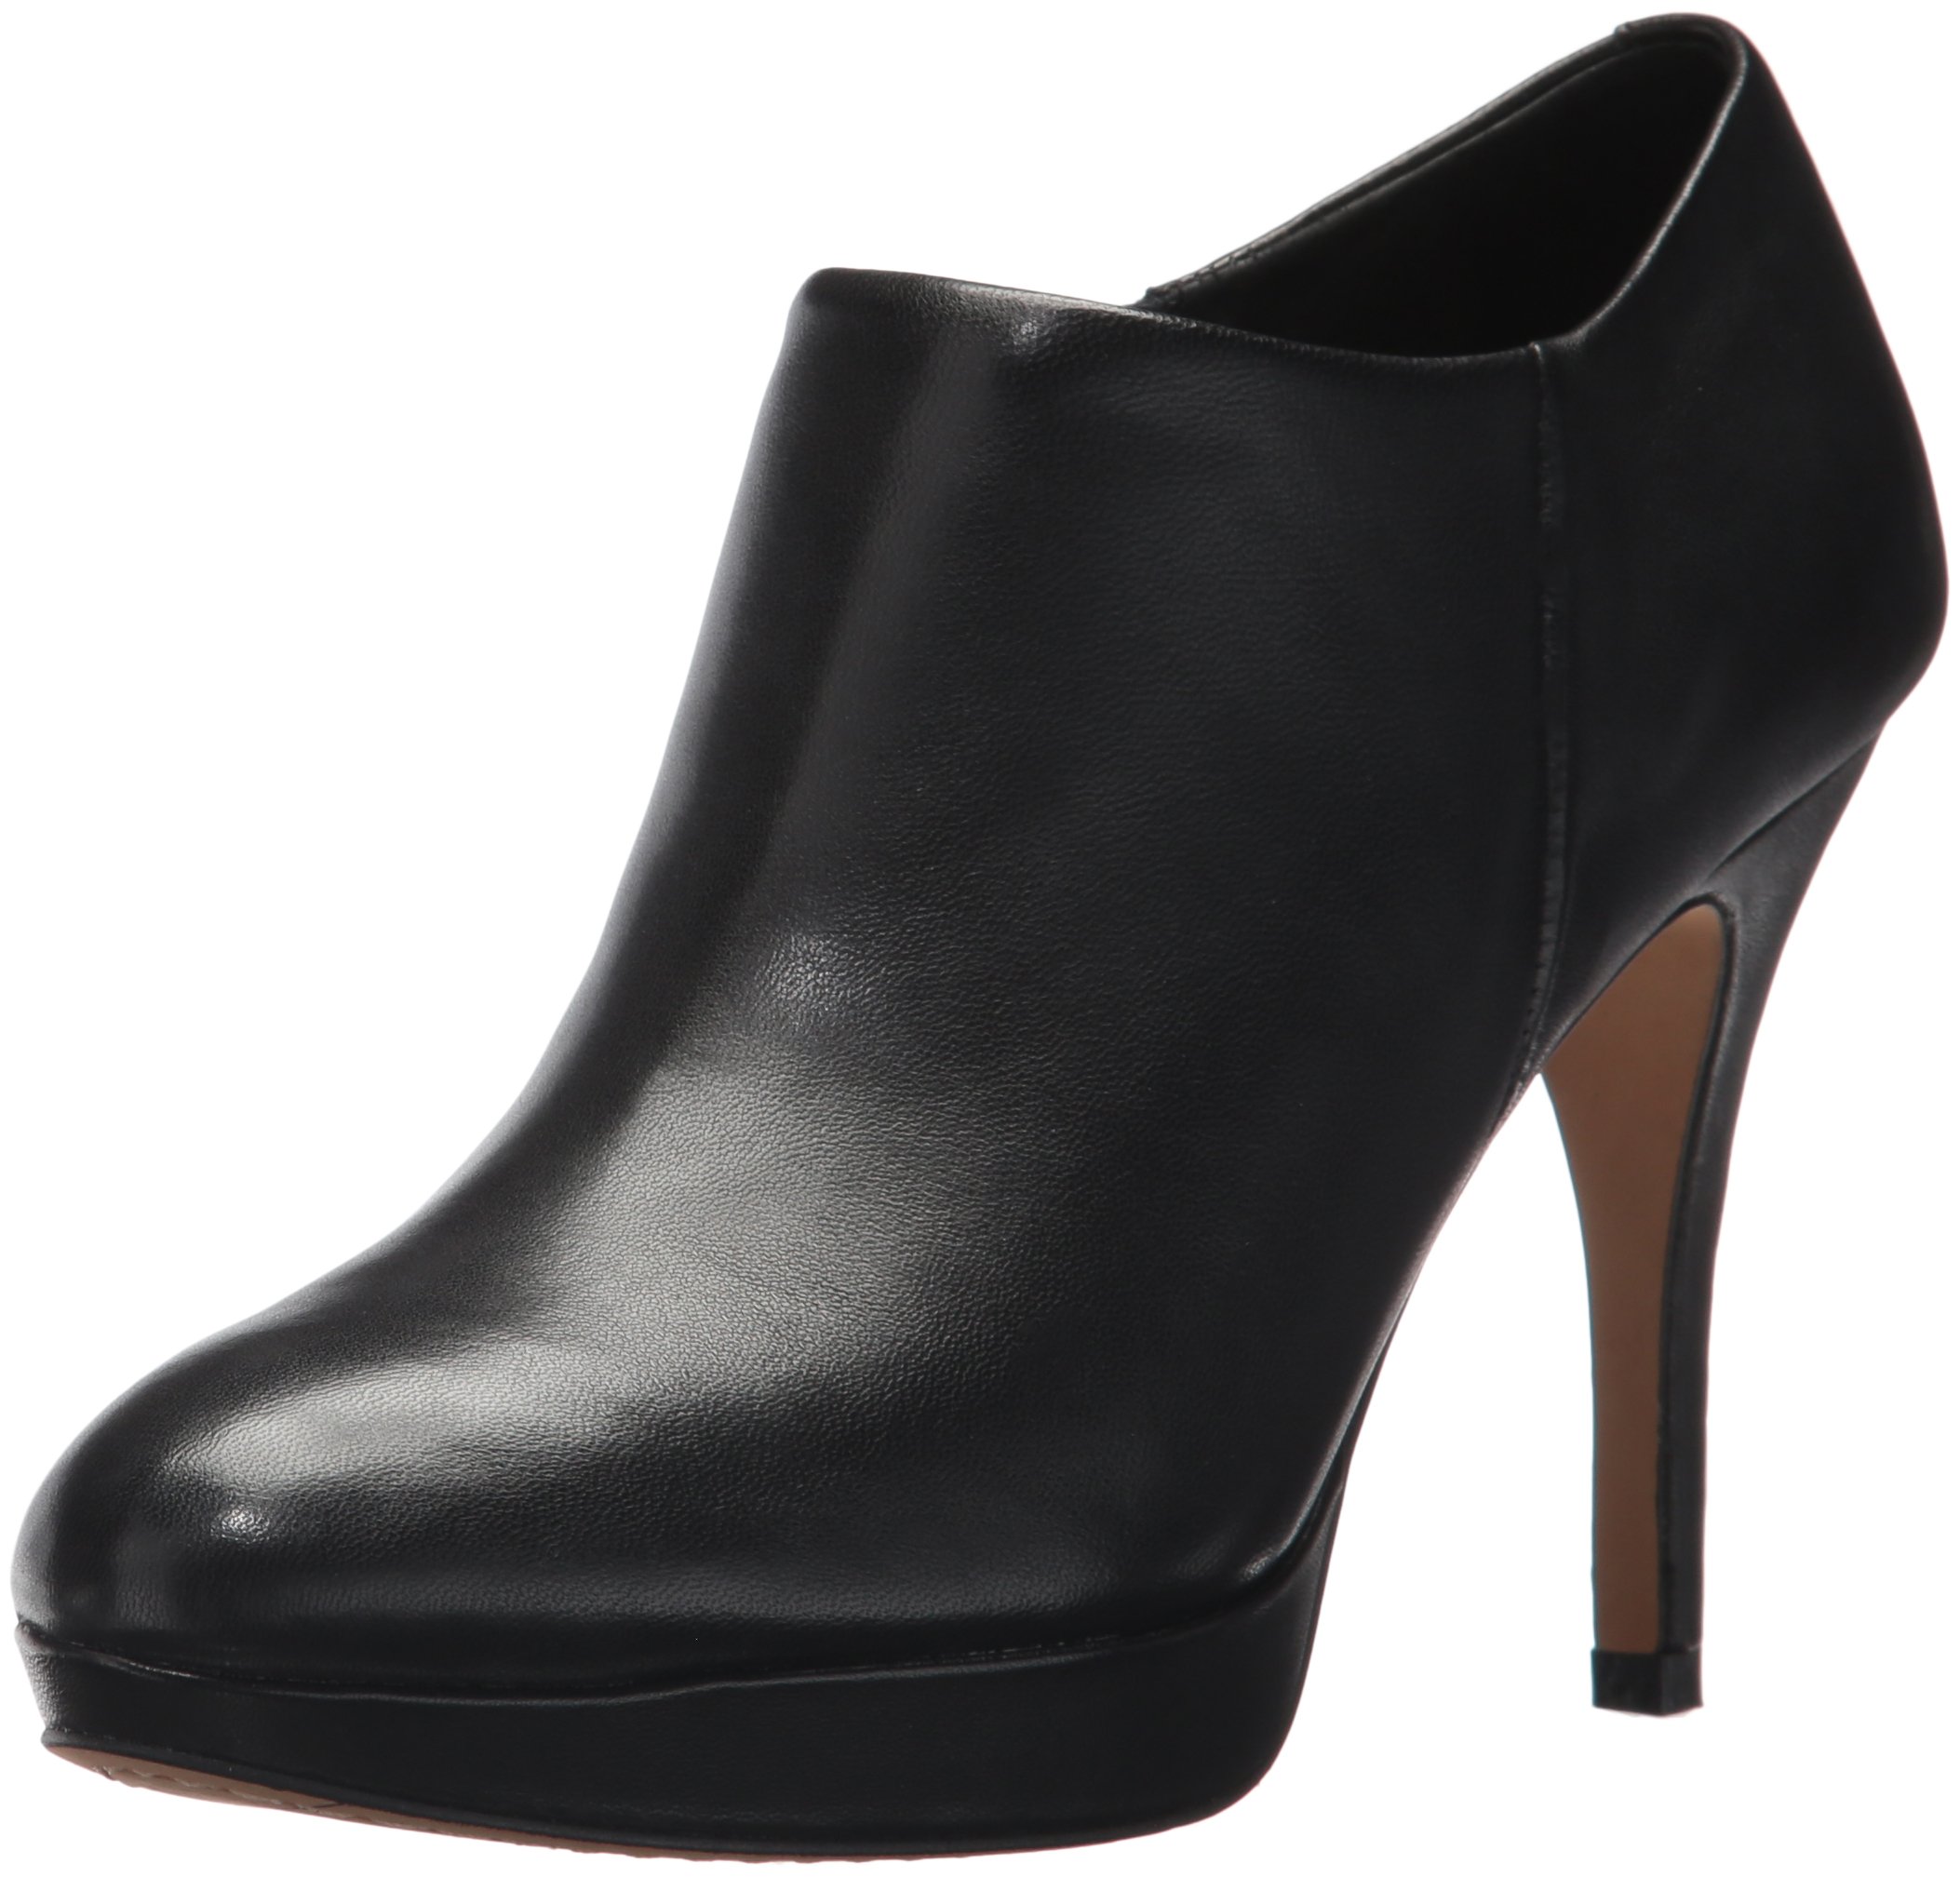 Vince Camuto Women's Elvin Bootie Ankle Boot